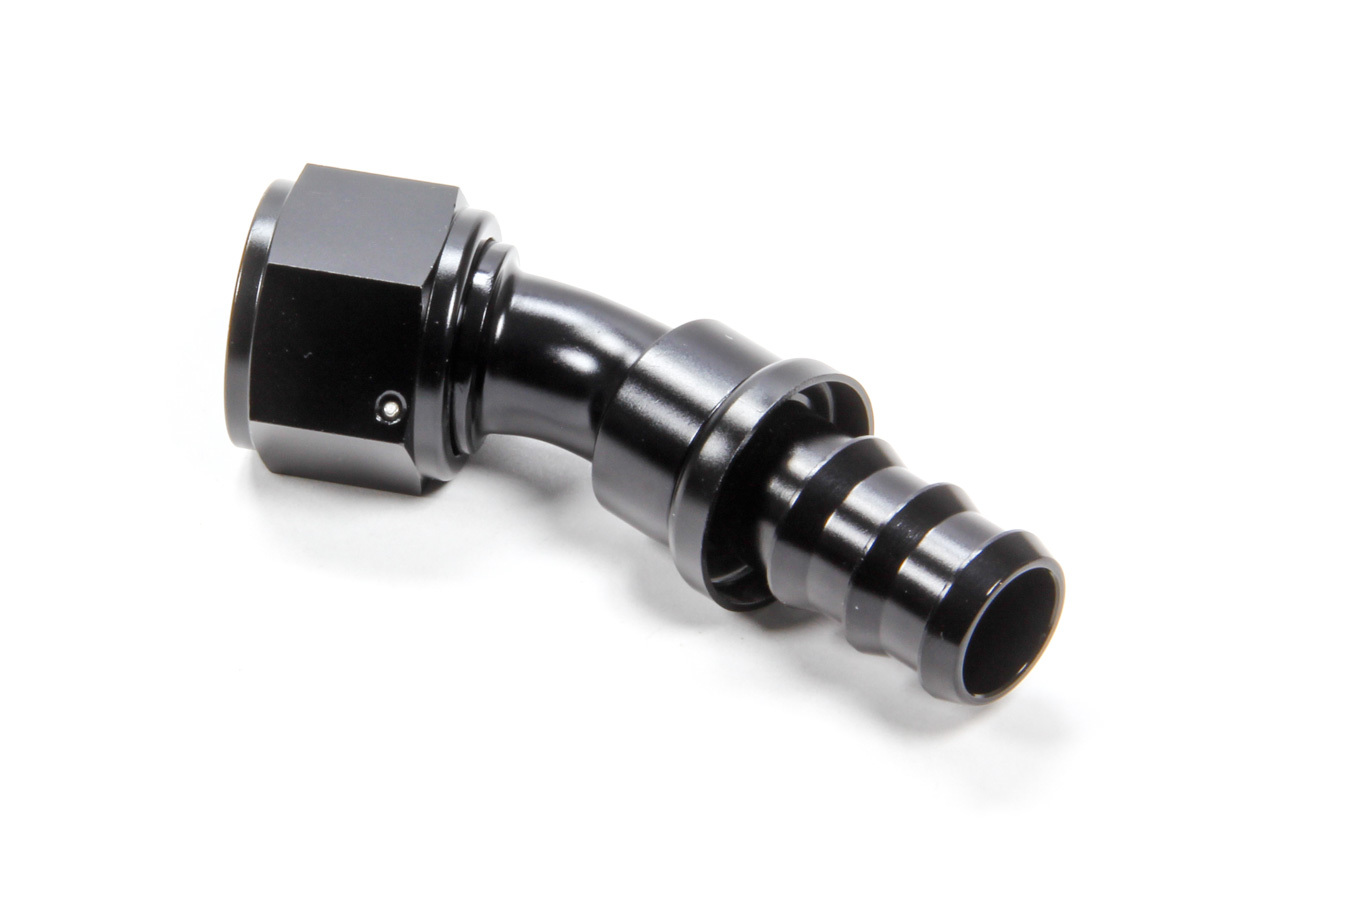 Triple X Race Components HF-13012-BLK Fitting, Hose End, 30 Degree, 12 AN Hose Barb to 12 AN Female, Aluminum, Black Anodized, Each